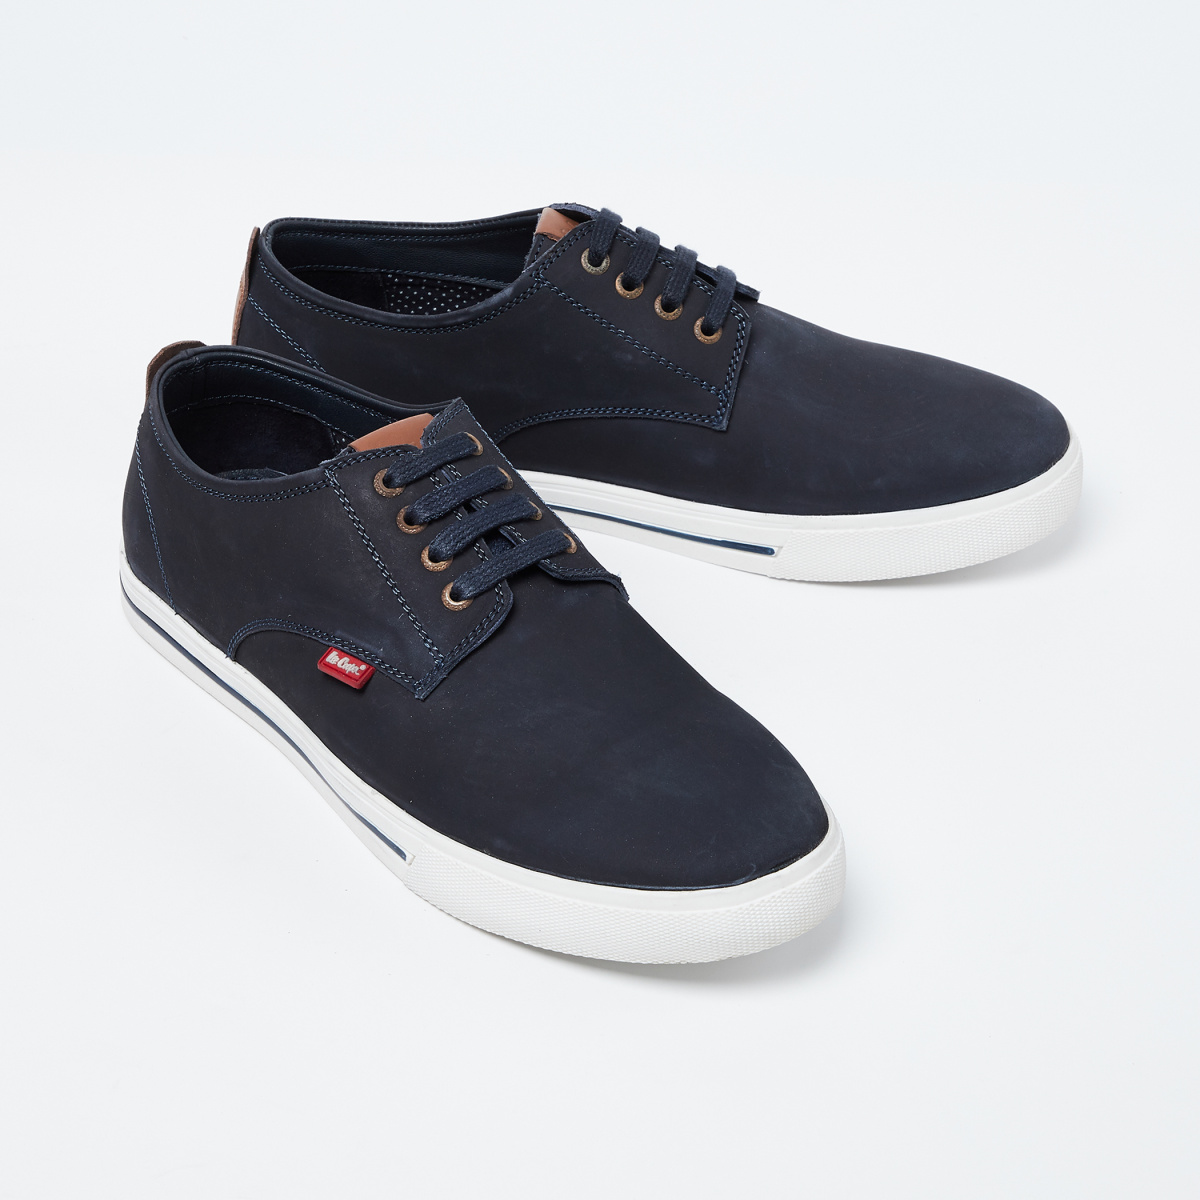 LEE COOPER Solid Casual Shoes with Contrast Panel